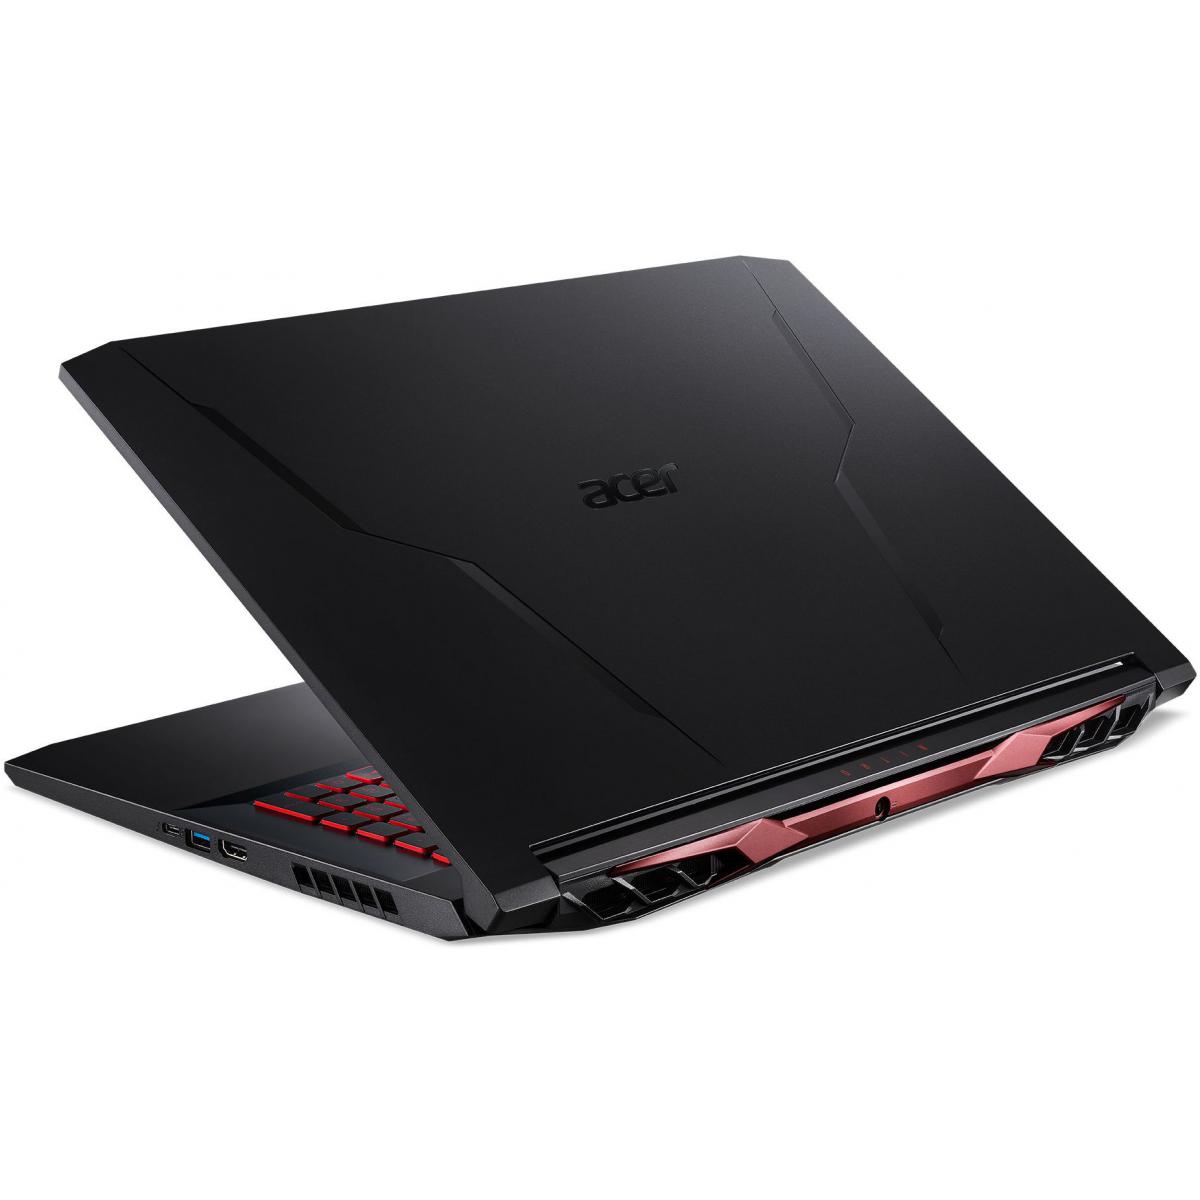 PC Portable Gamer Acer NH.QF8EF.001